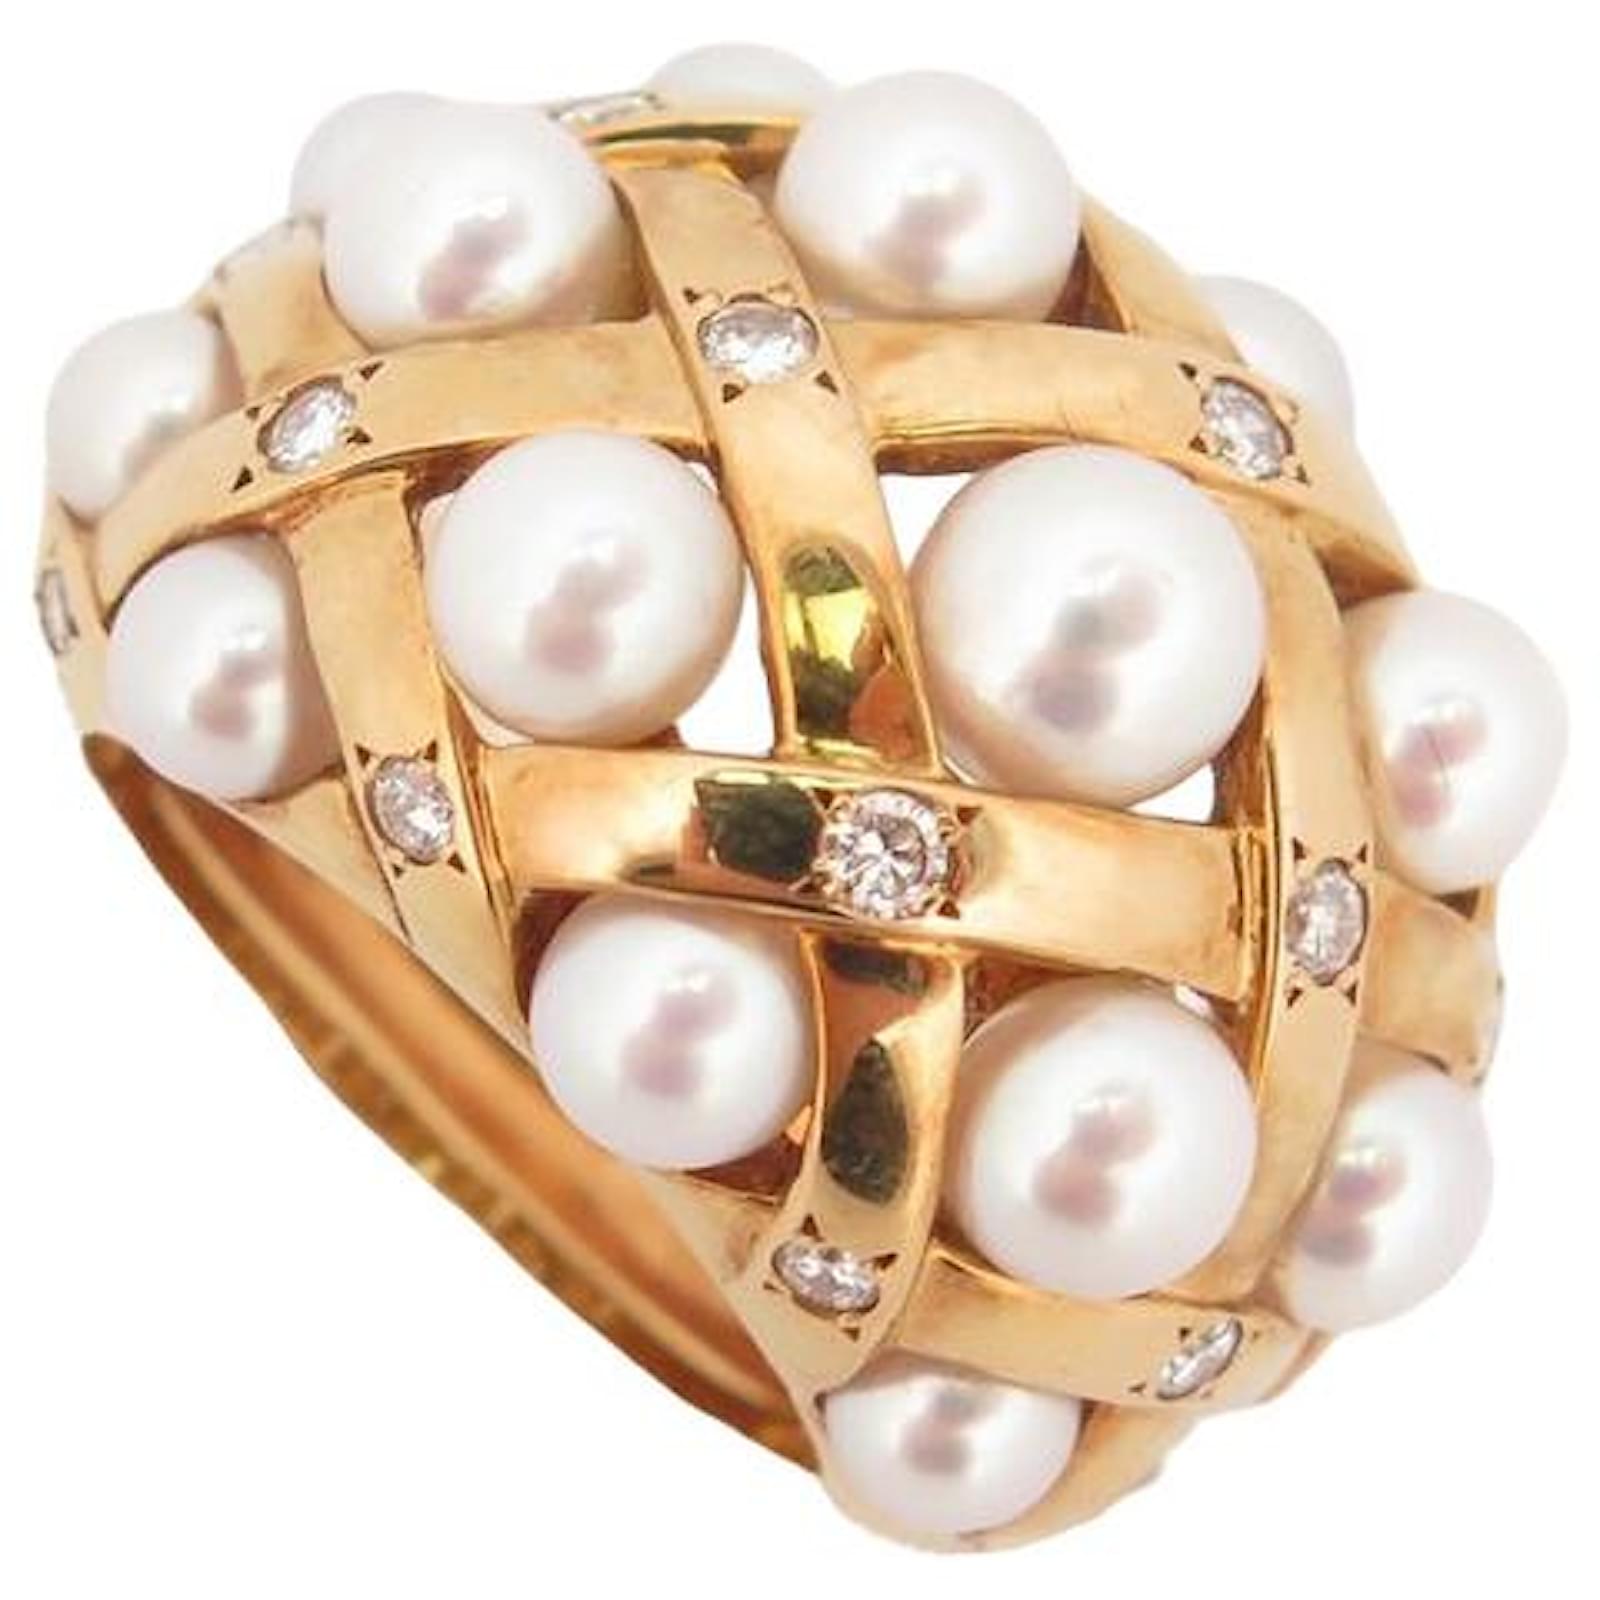 Rings Chanel Vintage Chanel Baroque T RING50 Yellow Gold 18K Pearls & Diamonds Diamonds Ring